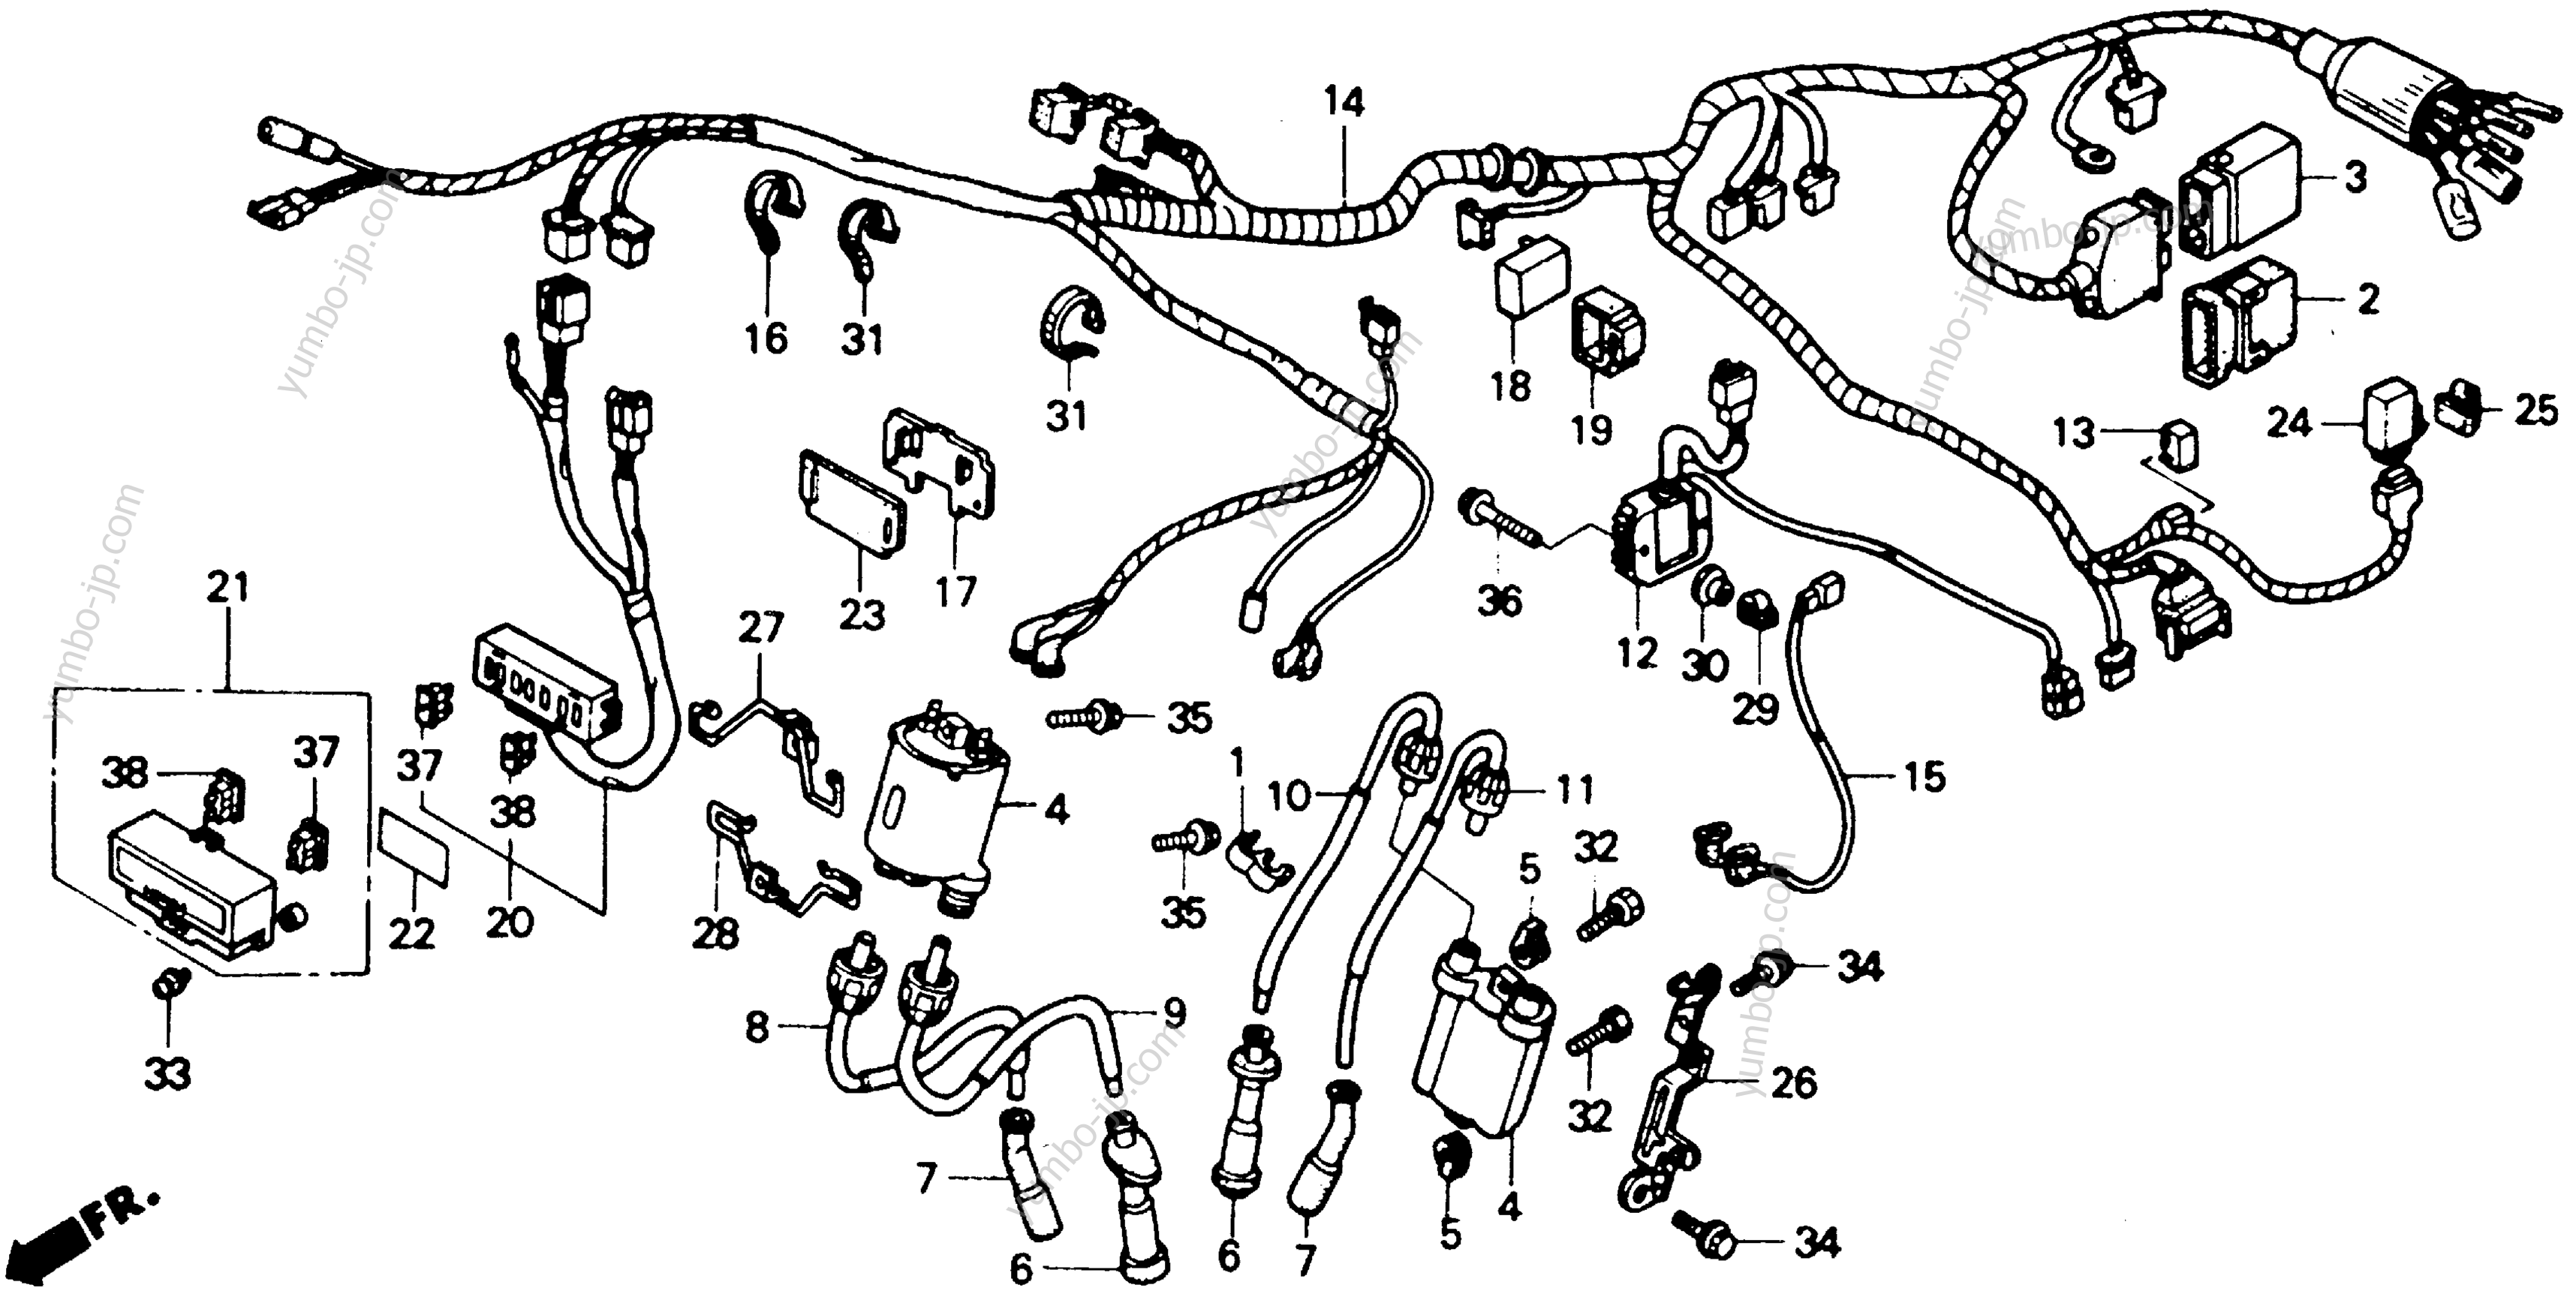 WIRE HARNESS for motorcycles HONDA NT650 AC 1991 year